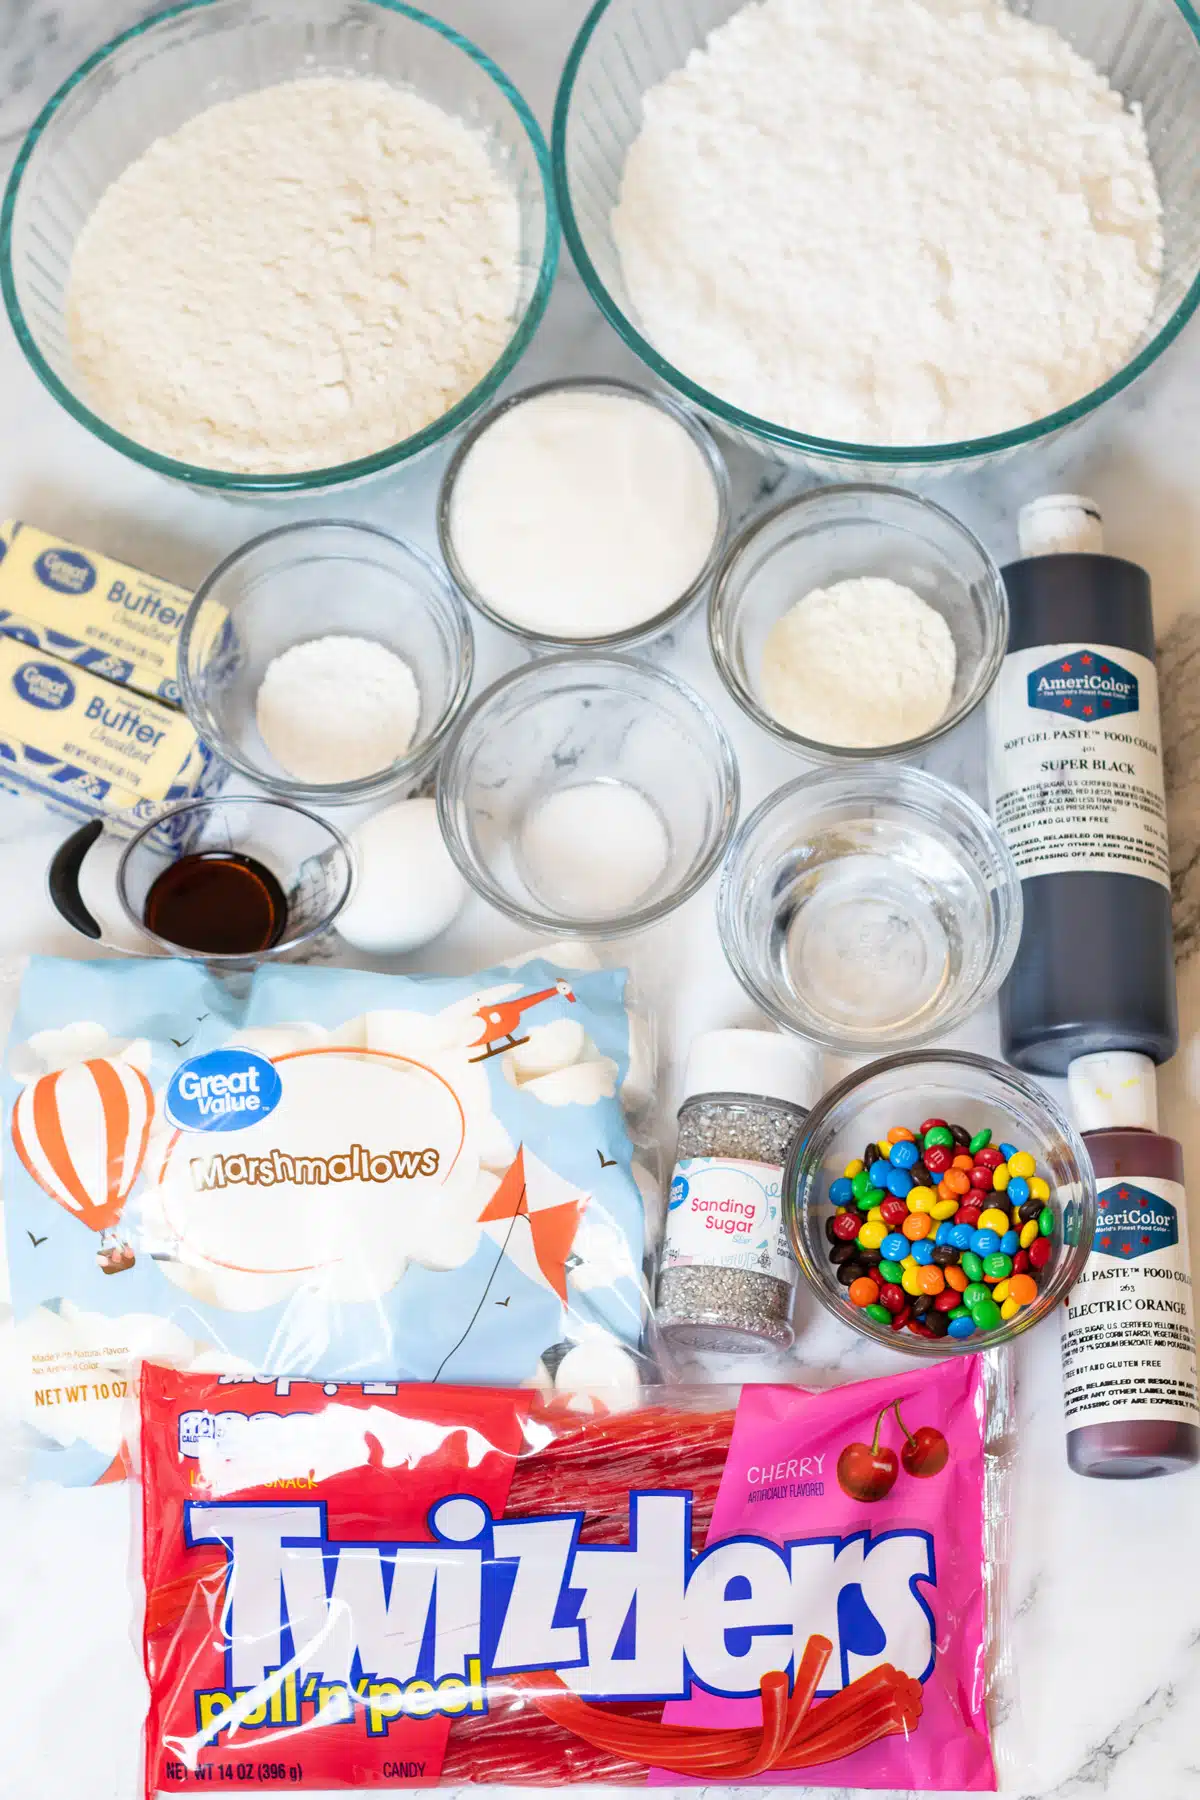 Ingredient image showing everything needed to make these melting snowman sugar cookies.